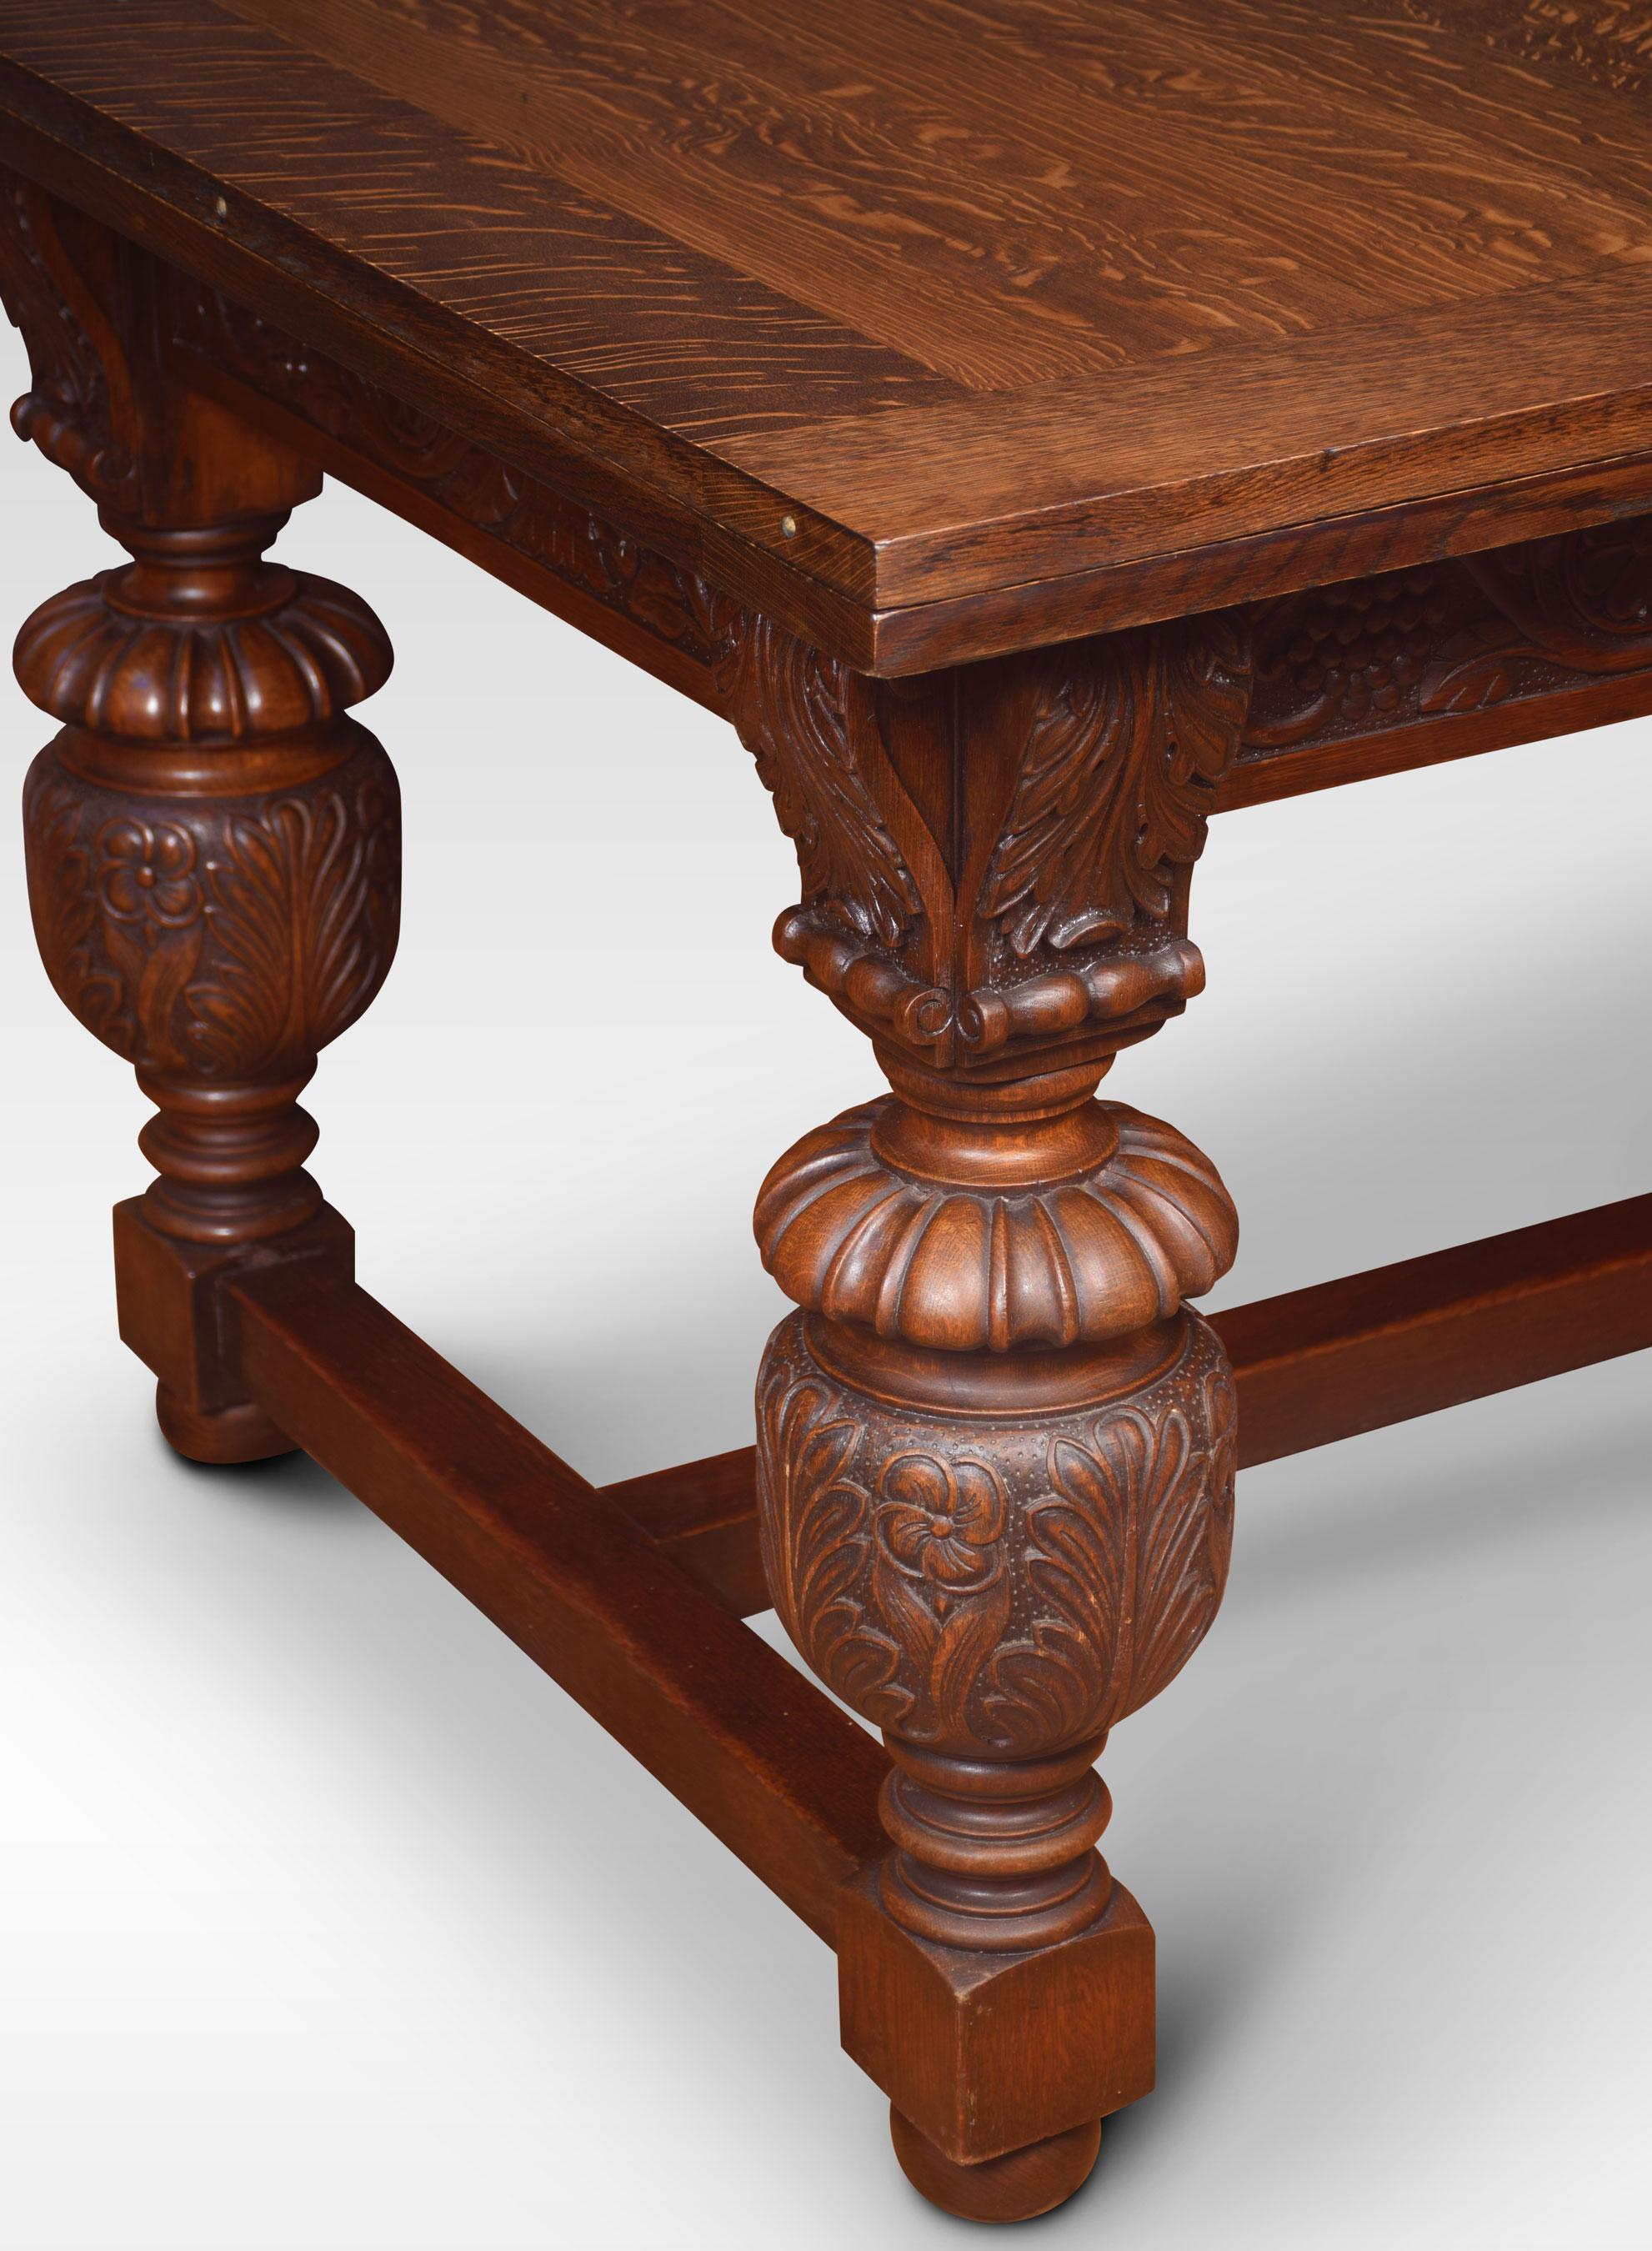 An impressive Elizabethan style oak draw-leaf table of generous proportions. The thick plank top having pull-out leaves to each end above a strap-work frieze with scrolling foliated carving raised on bulbous cup & cover legs leading down to block